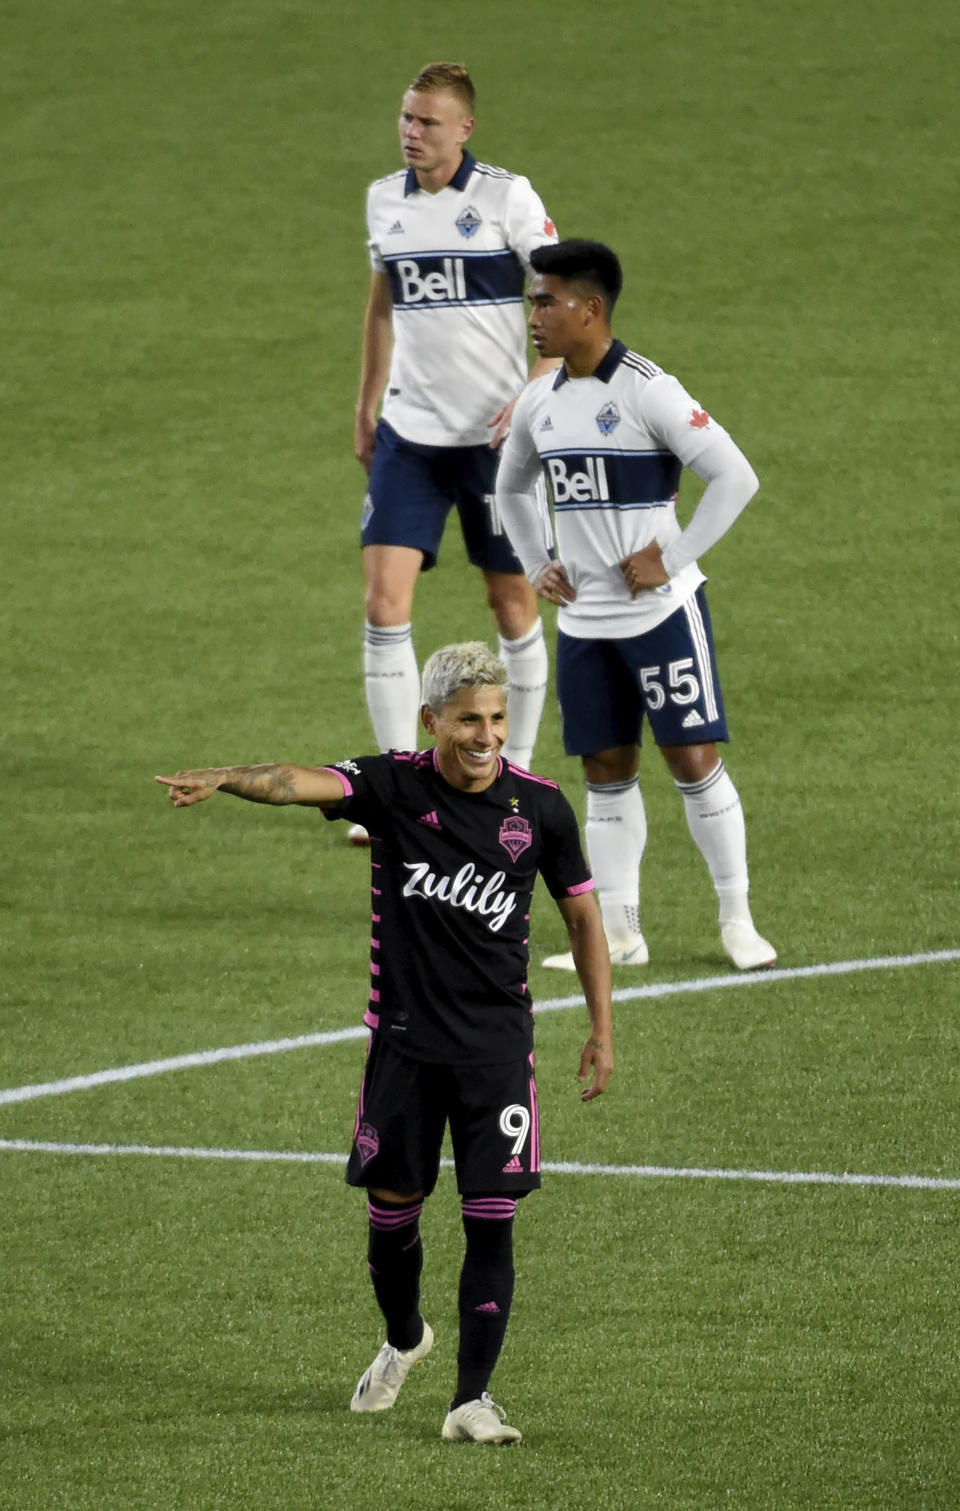 Seattle Sounders forward Raul Ruidiaz, bottom, celebrate after the Sounders scored a goal as Vancouver Whitecaps midfielder Michael Baldisimo, center, and midfielder Andy Rose, top, stand nearby during the second half of an MLS soccer match in Portland, Ore., Tuesday, Oct. 27, 2020. (AP Photo/Steve Dykes)